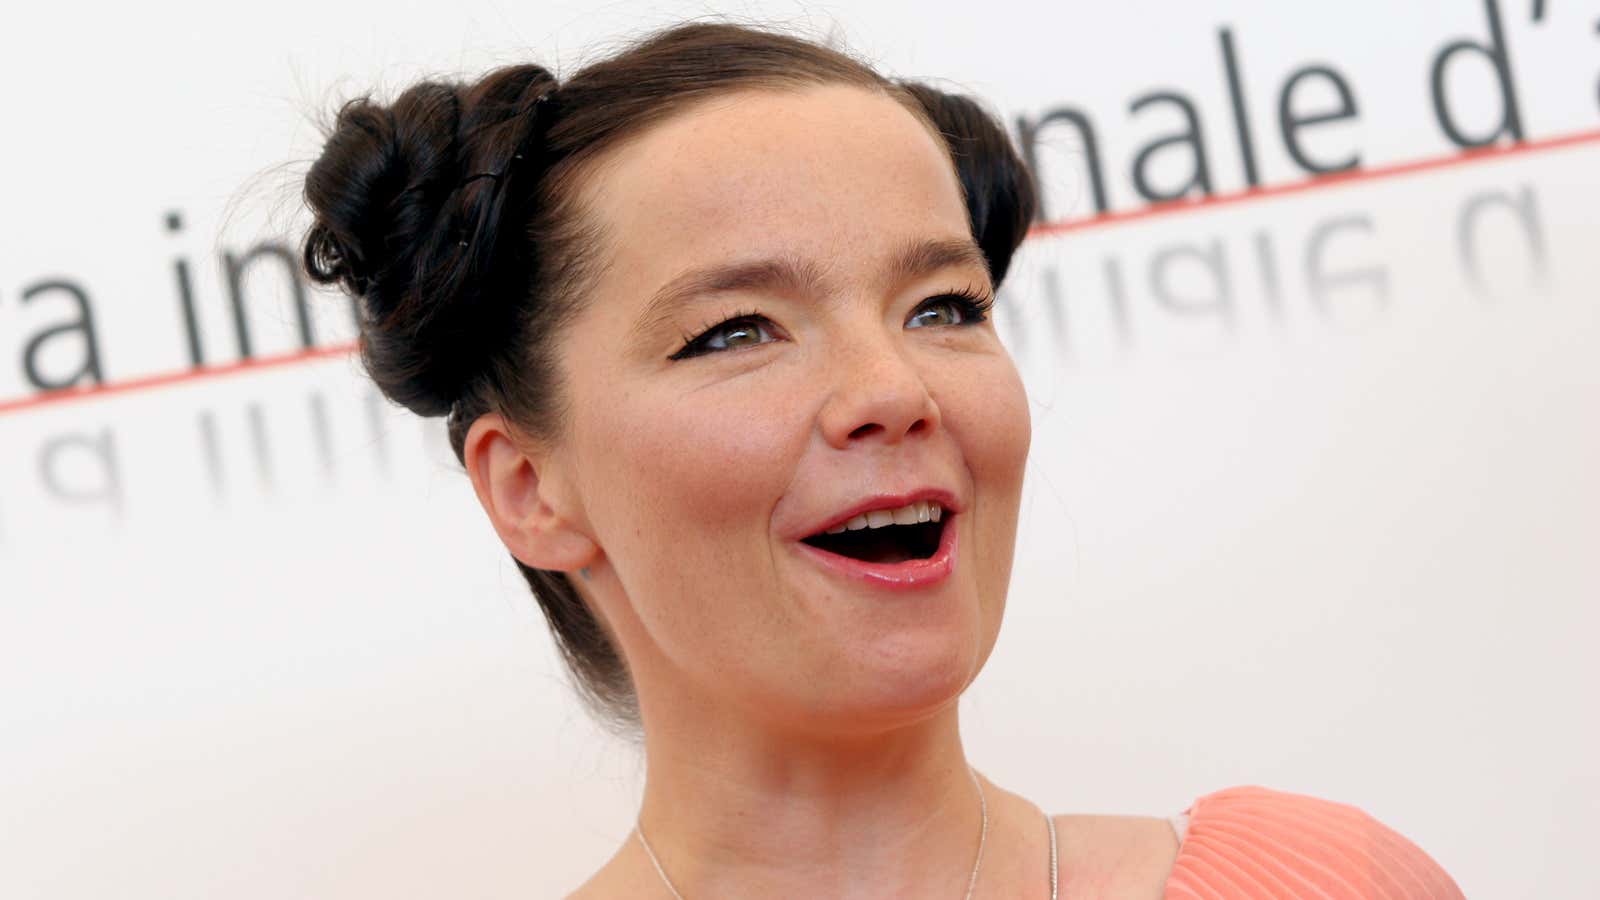 Bjork’s name is frequently mispronounced outside of Iceland.